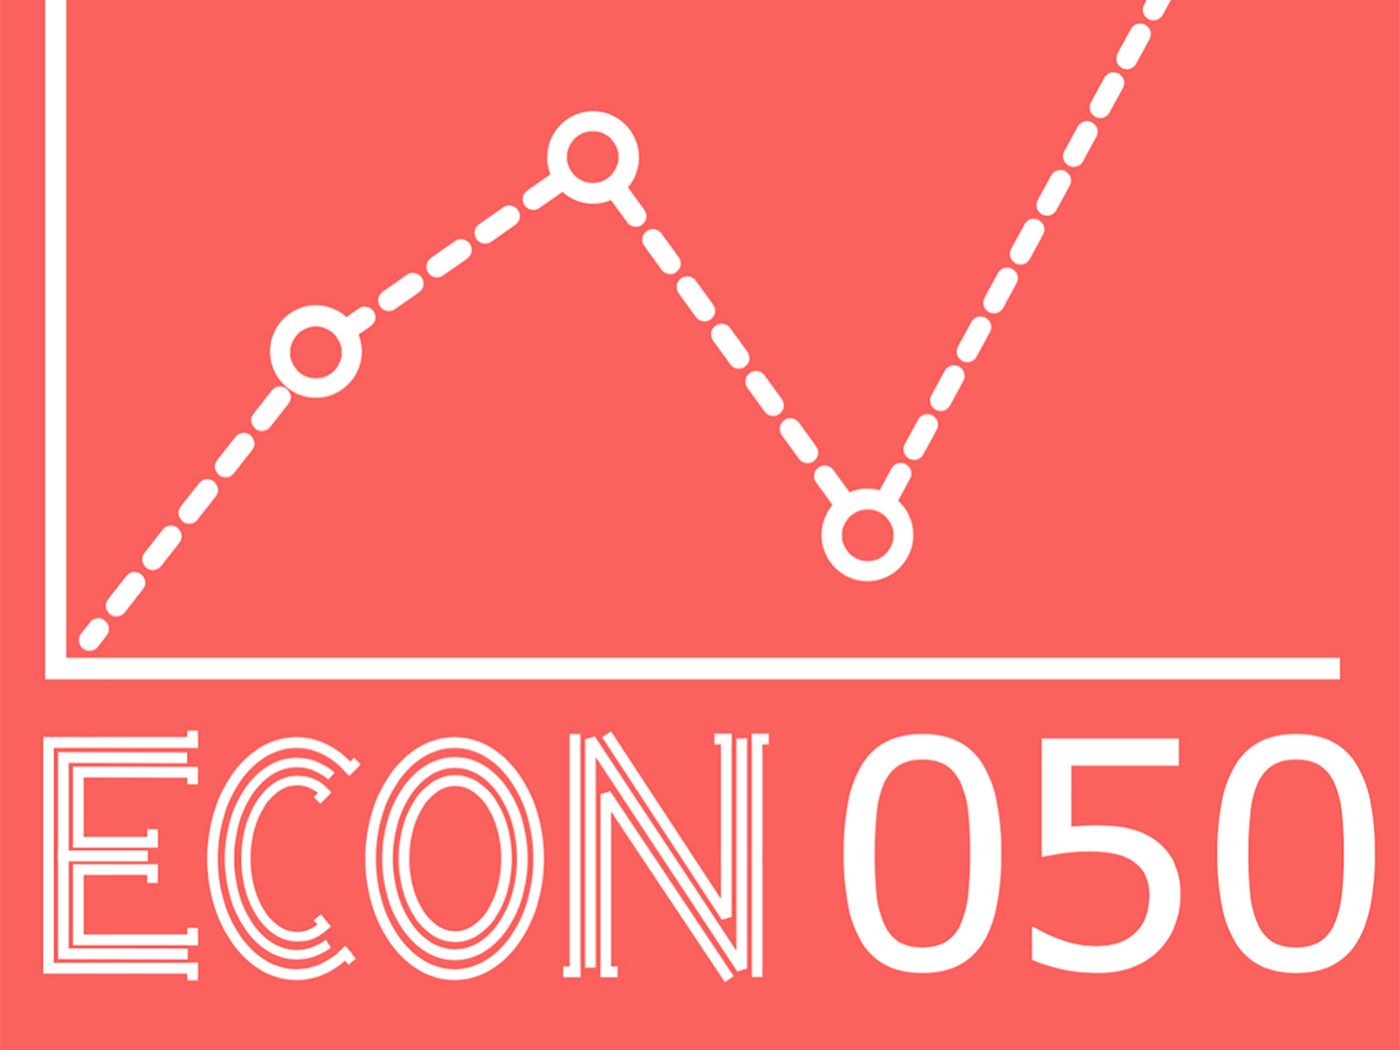 Econ 050 is a podcast made in collaboration between the Faculty of Economics and Business and The Northern Times.